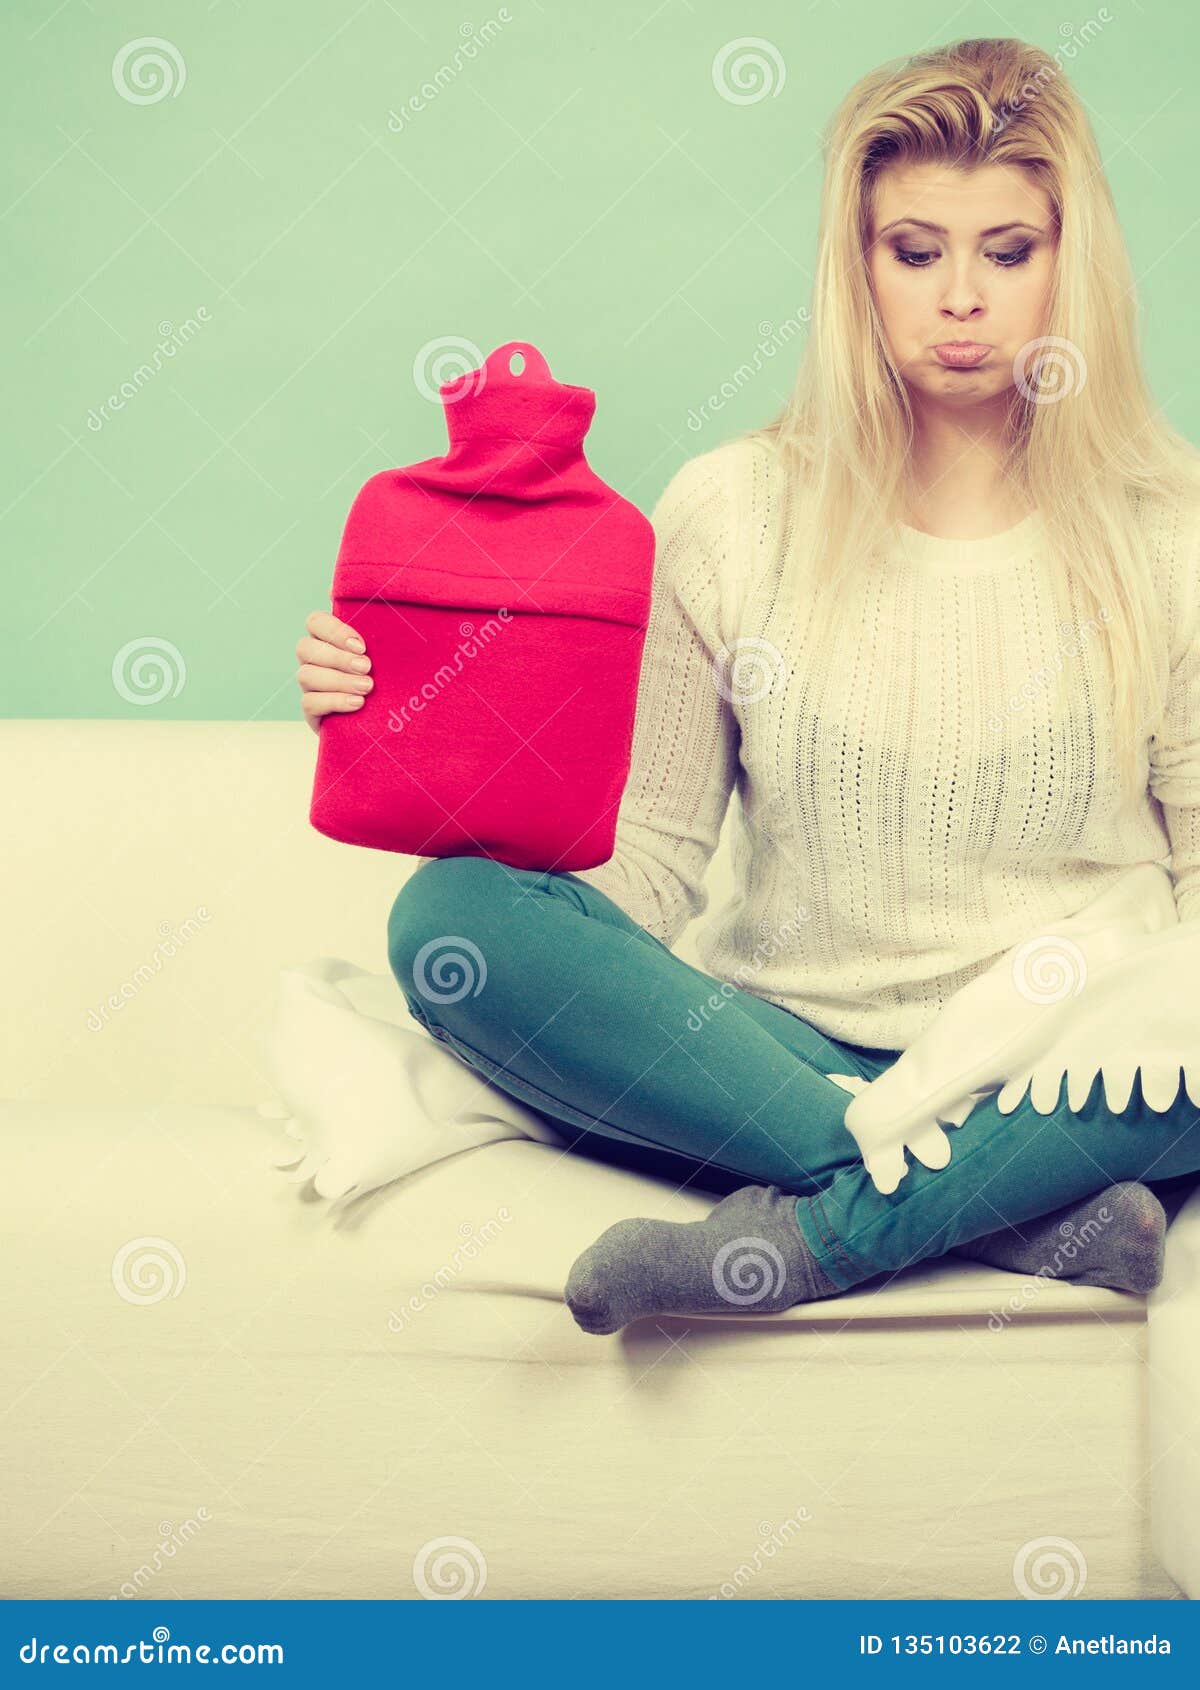 Woman Sitting on Couch Holding Hot Water Bottle Stock Photo - Image of  indoor, jeans: 135103622